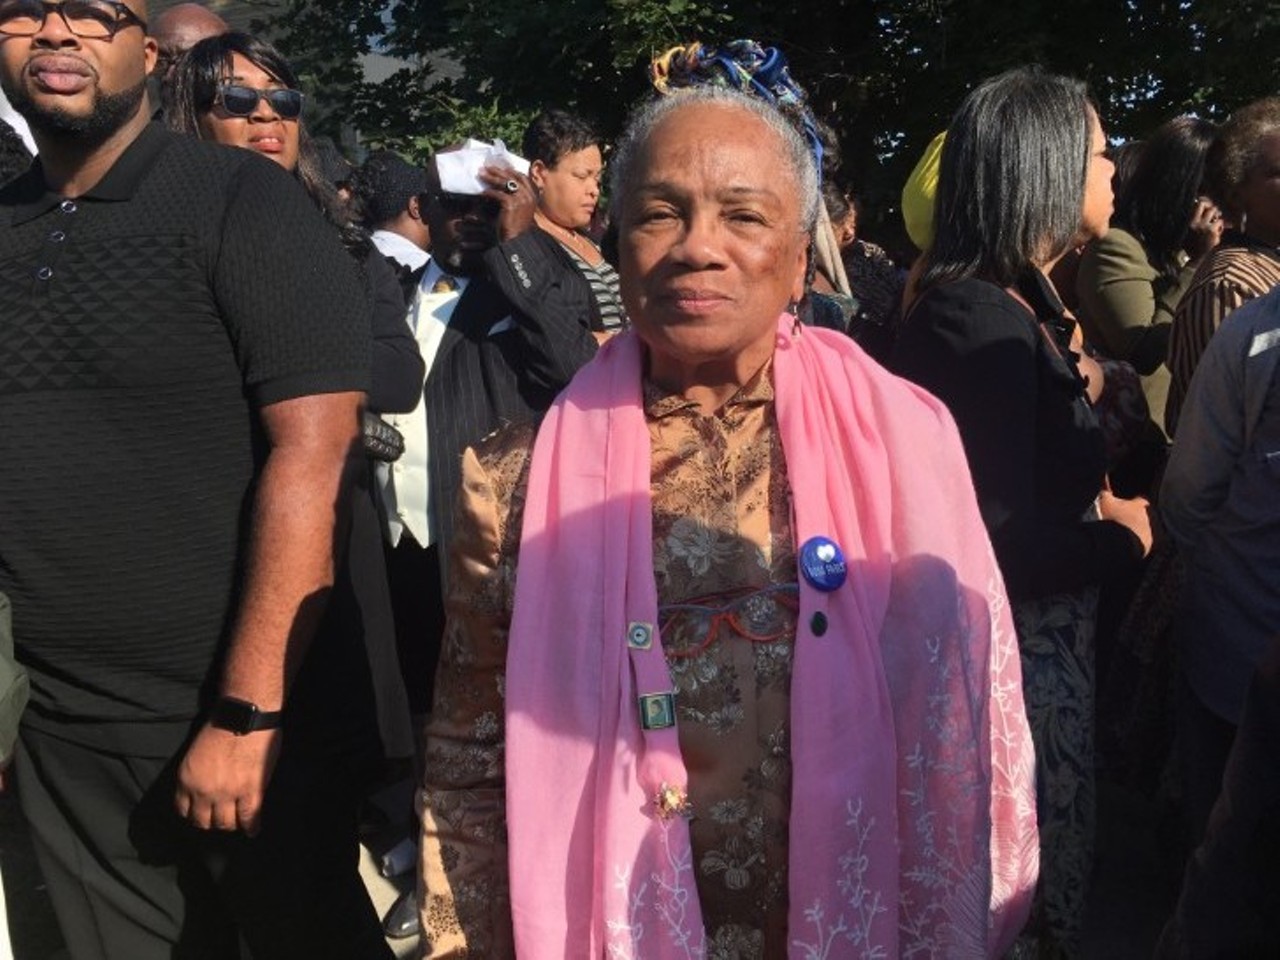 Detroit's finest showed up to pay their 'Respect' to Aretha Franklin